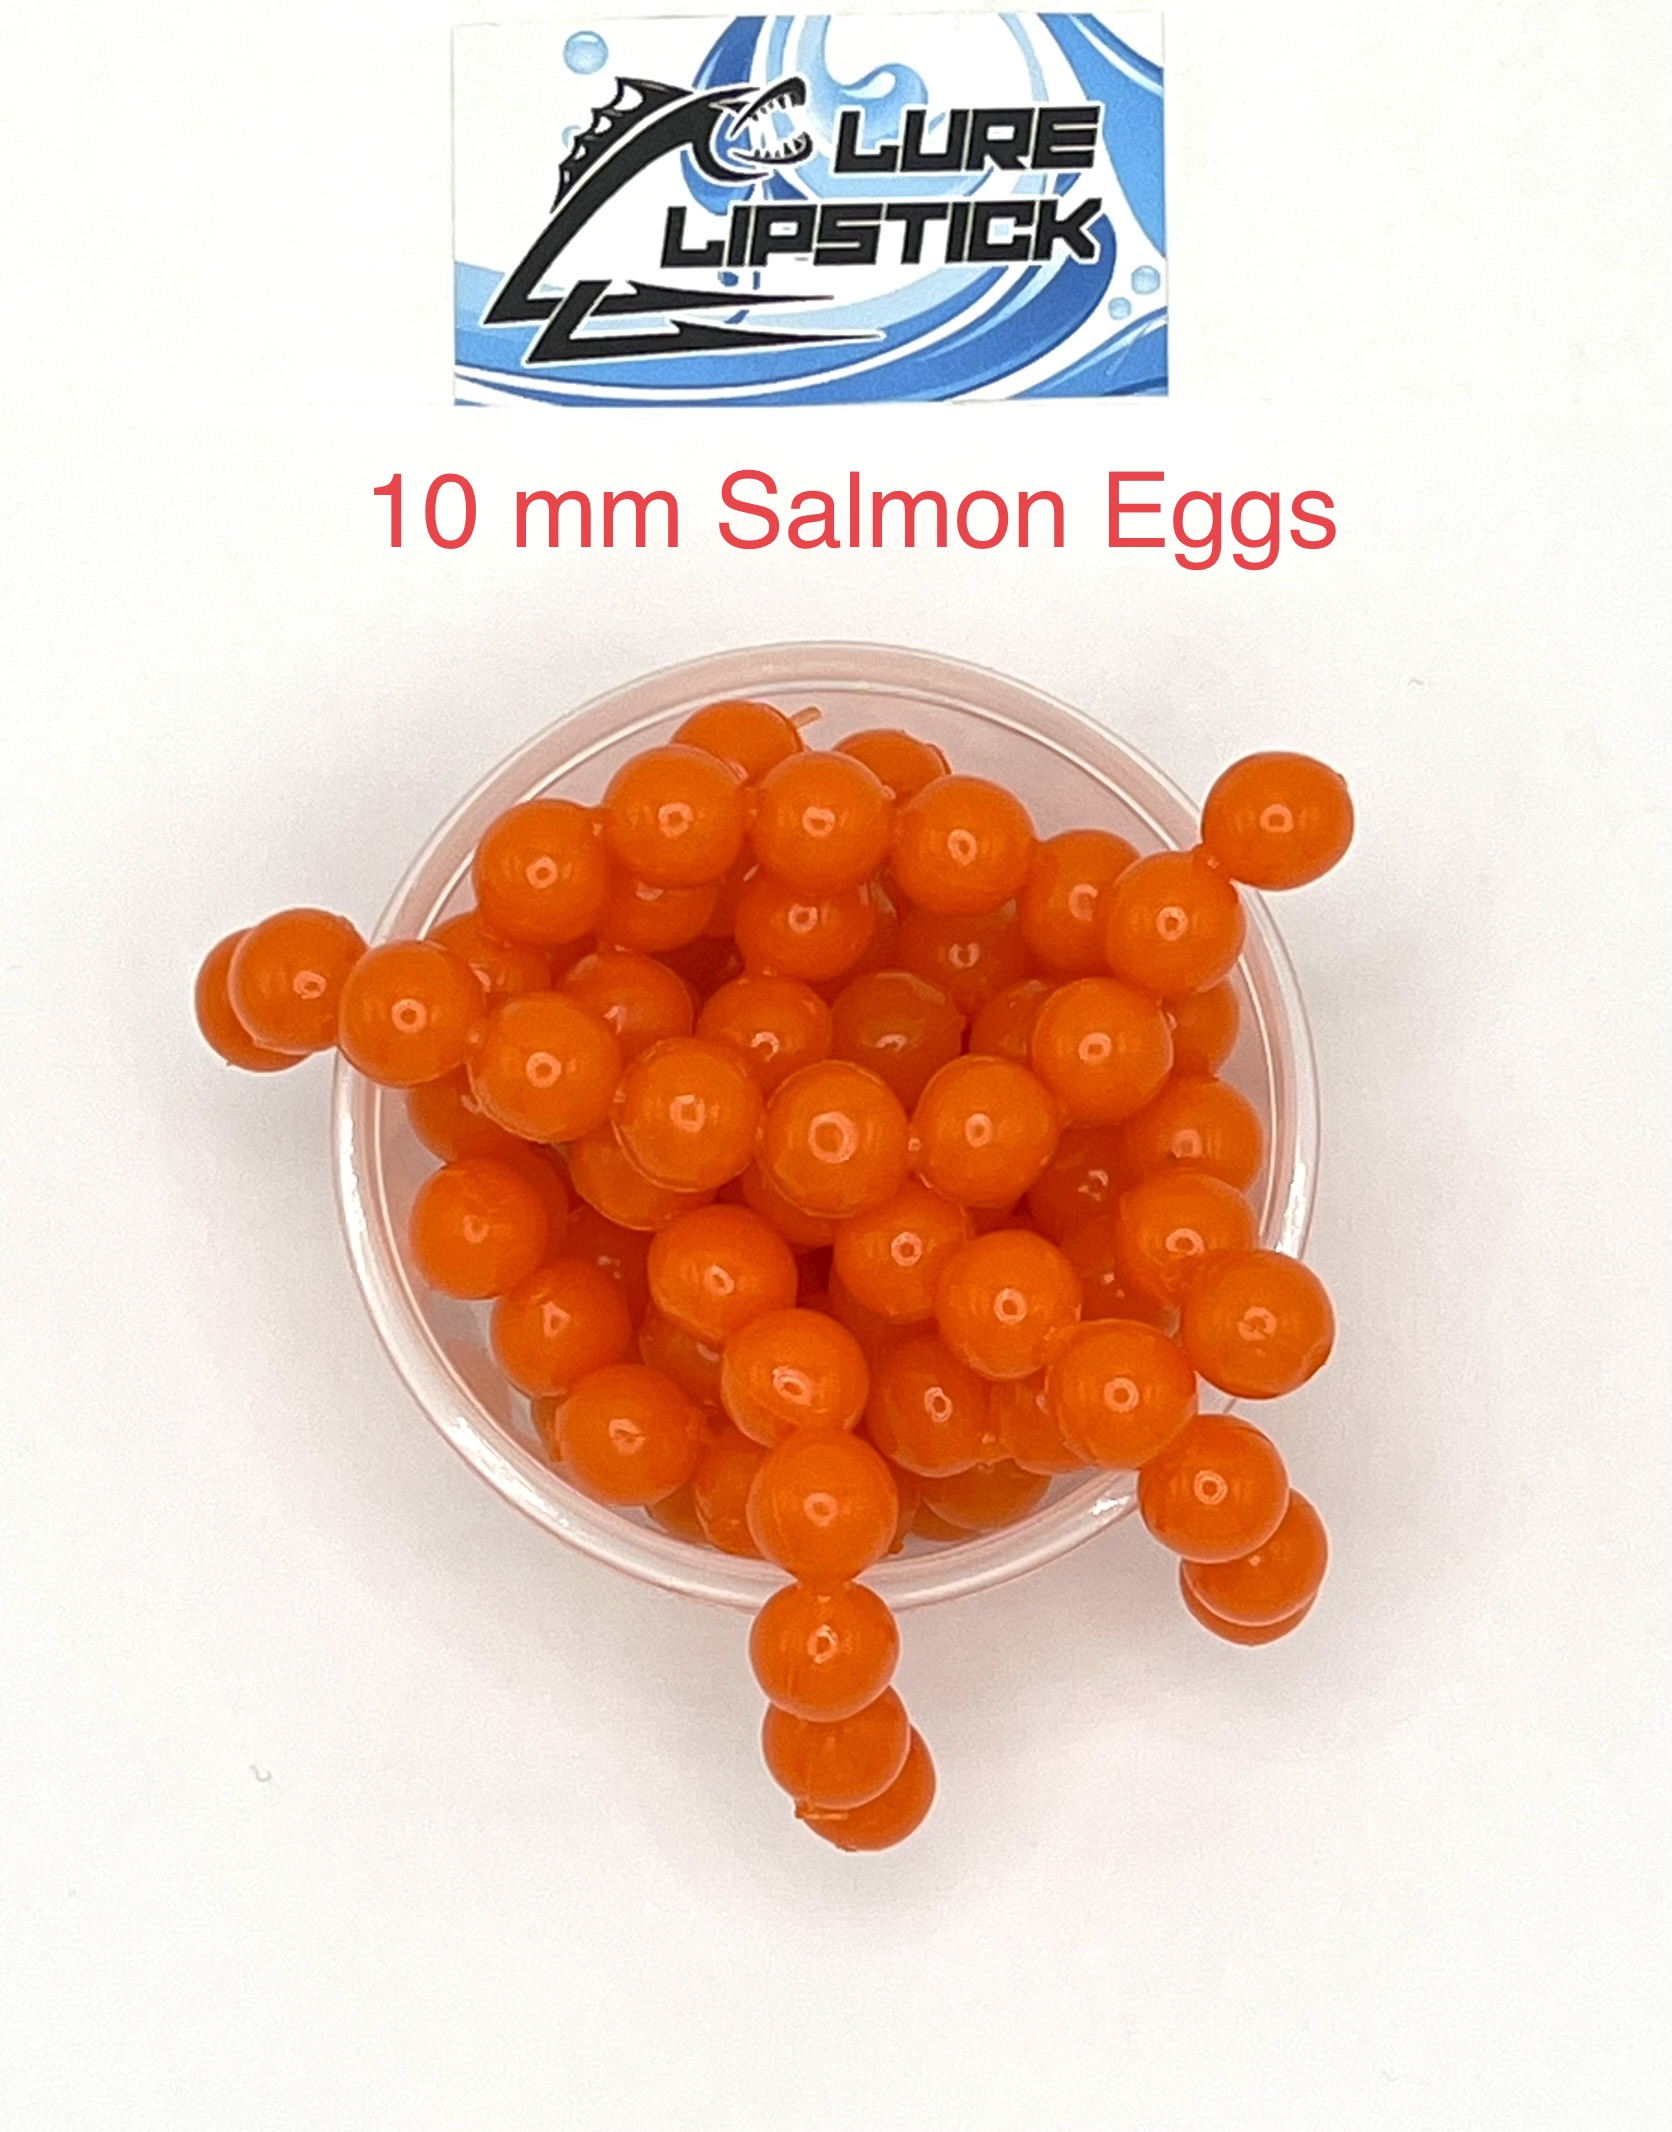 10mm or 6mm Salmon Eggs infused with Anise Oil - 25ct